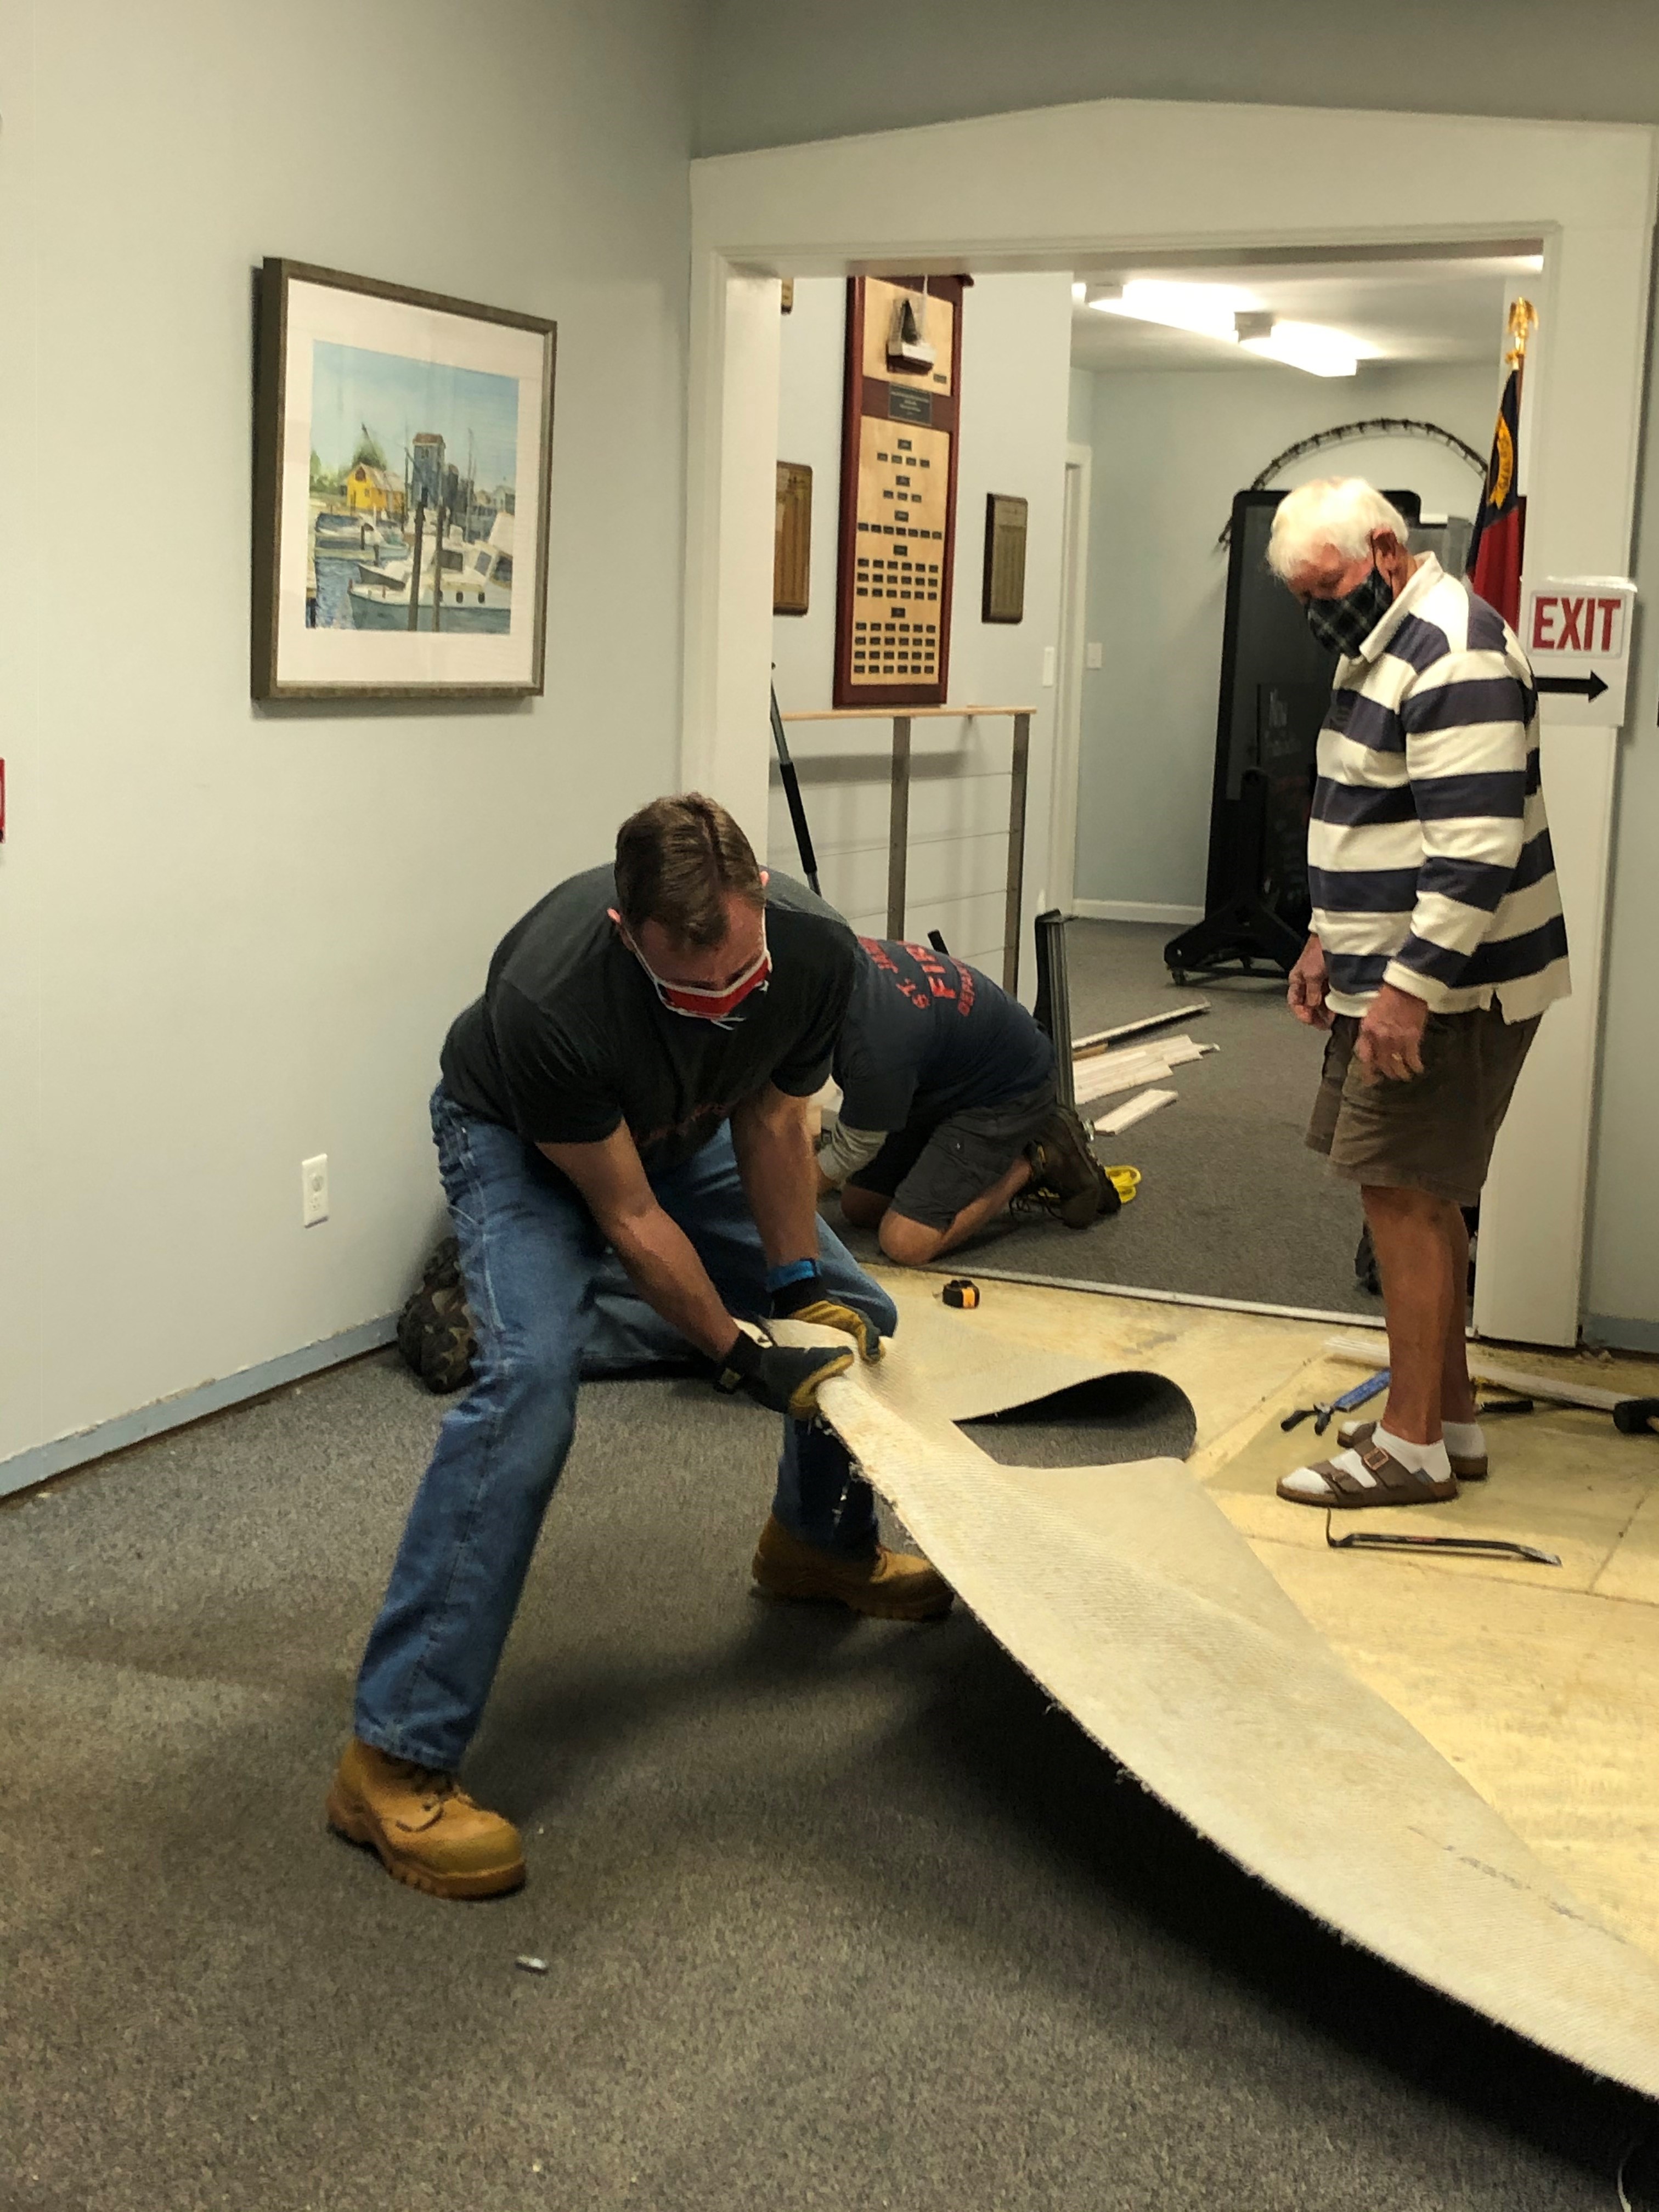 Museum volunteers help with facility repairs and upkeep